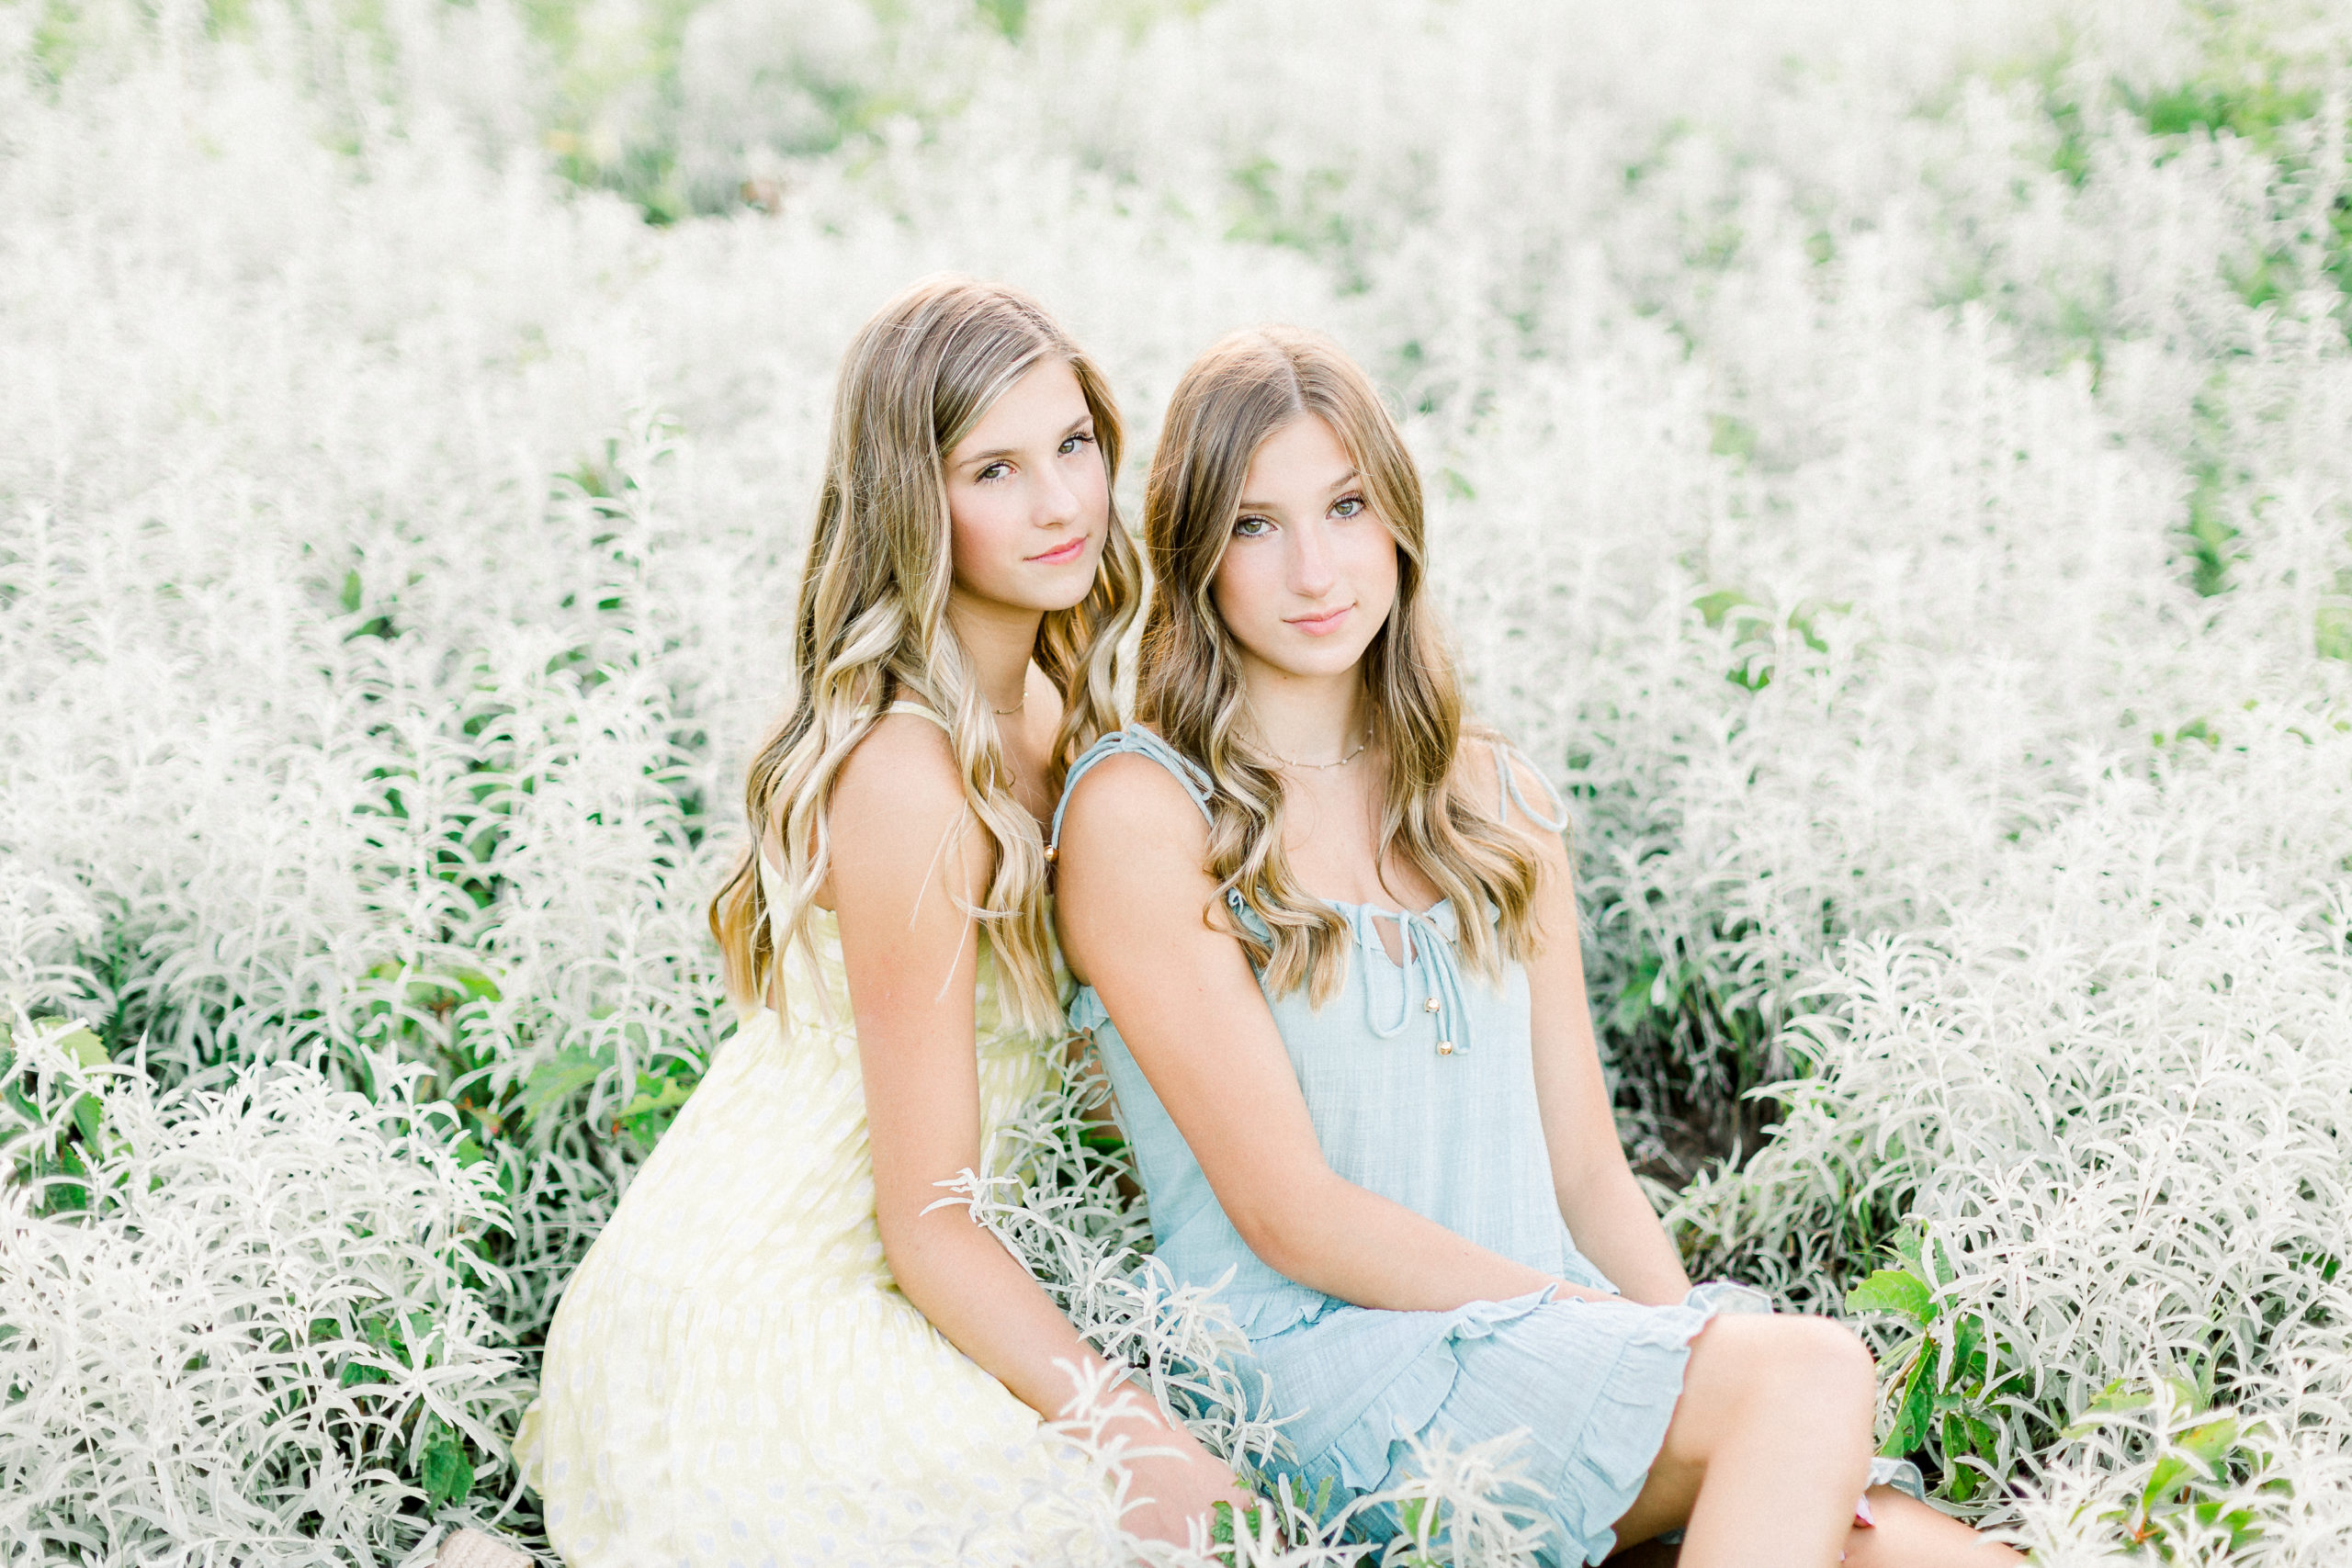 photoshoot ideas for sisters